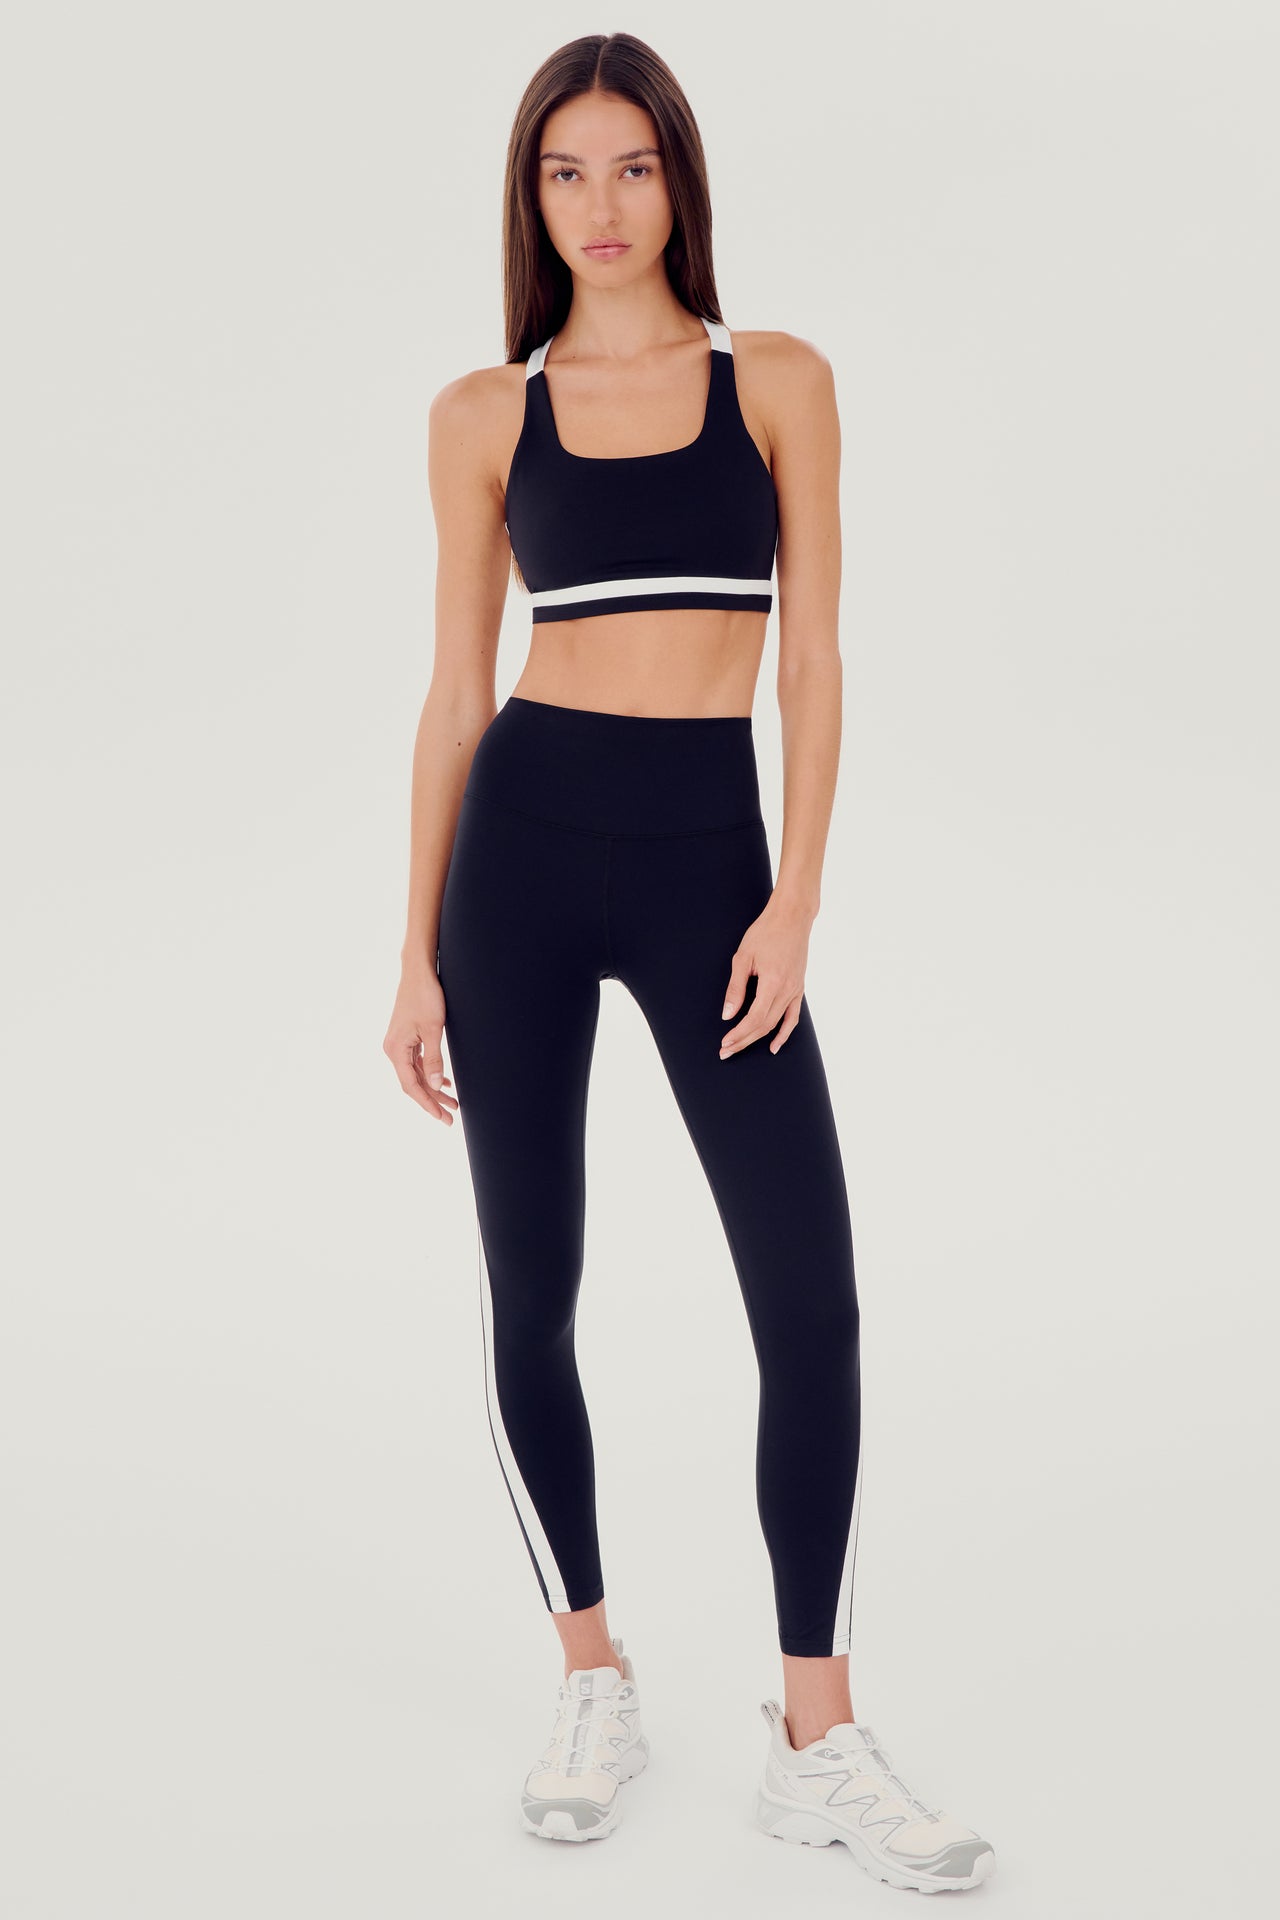 A woman wearing a SPLITS59 Miles Rigor Bra in Black/White designed for style and support, and leggings suitable for workouts.